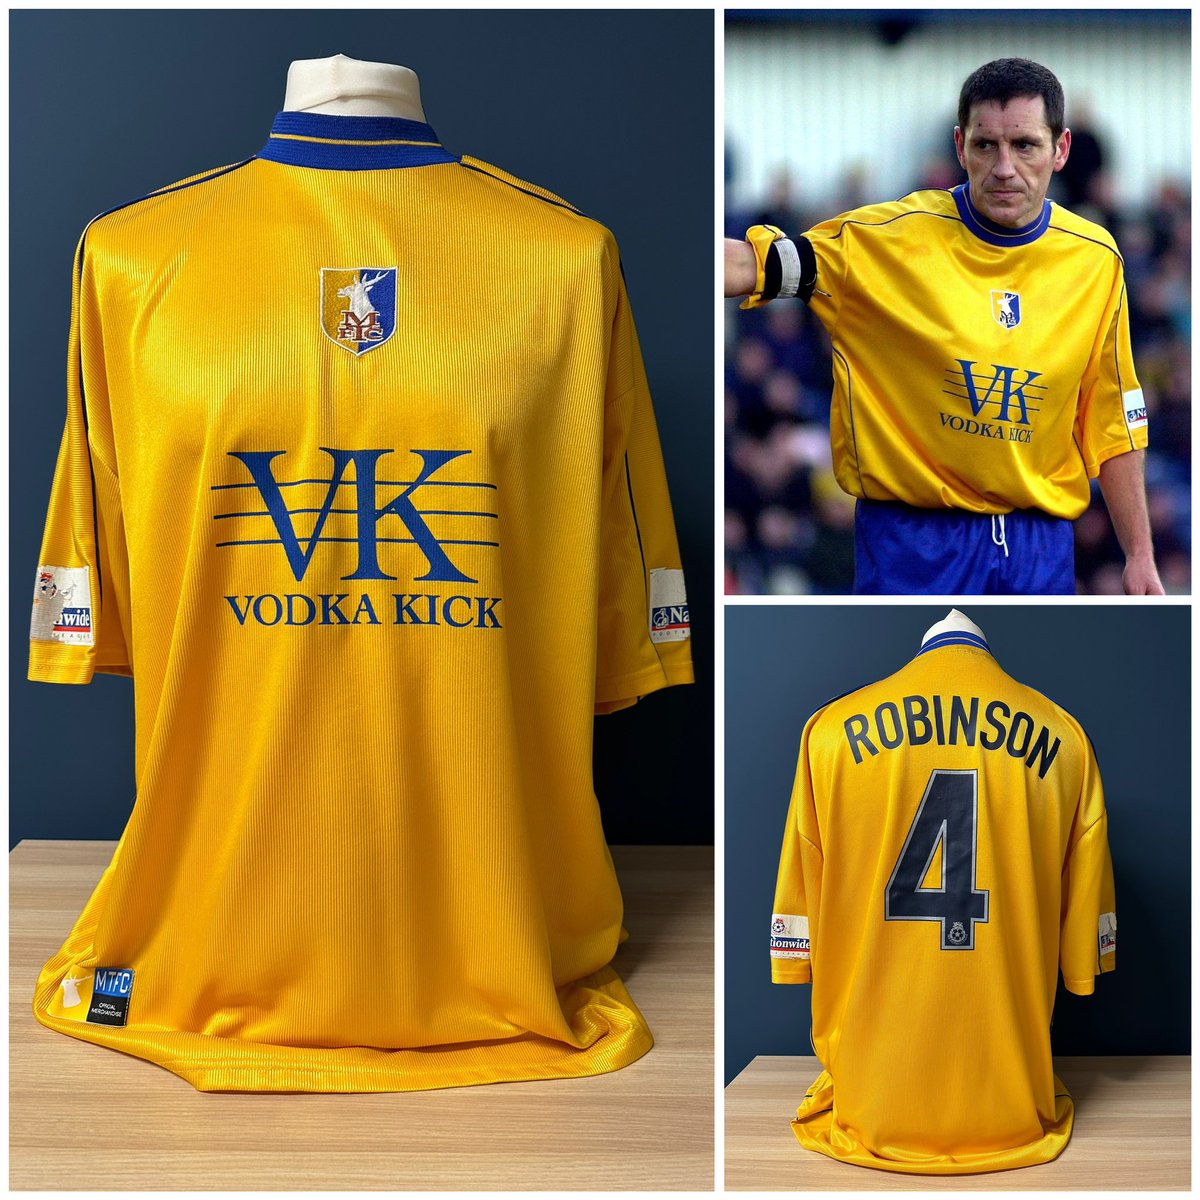 Probably this one @MarkMmmac. 2001/02 promotion winning shirt worn by the captain Les Robinson.